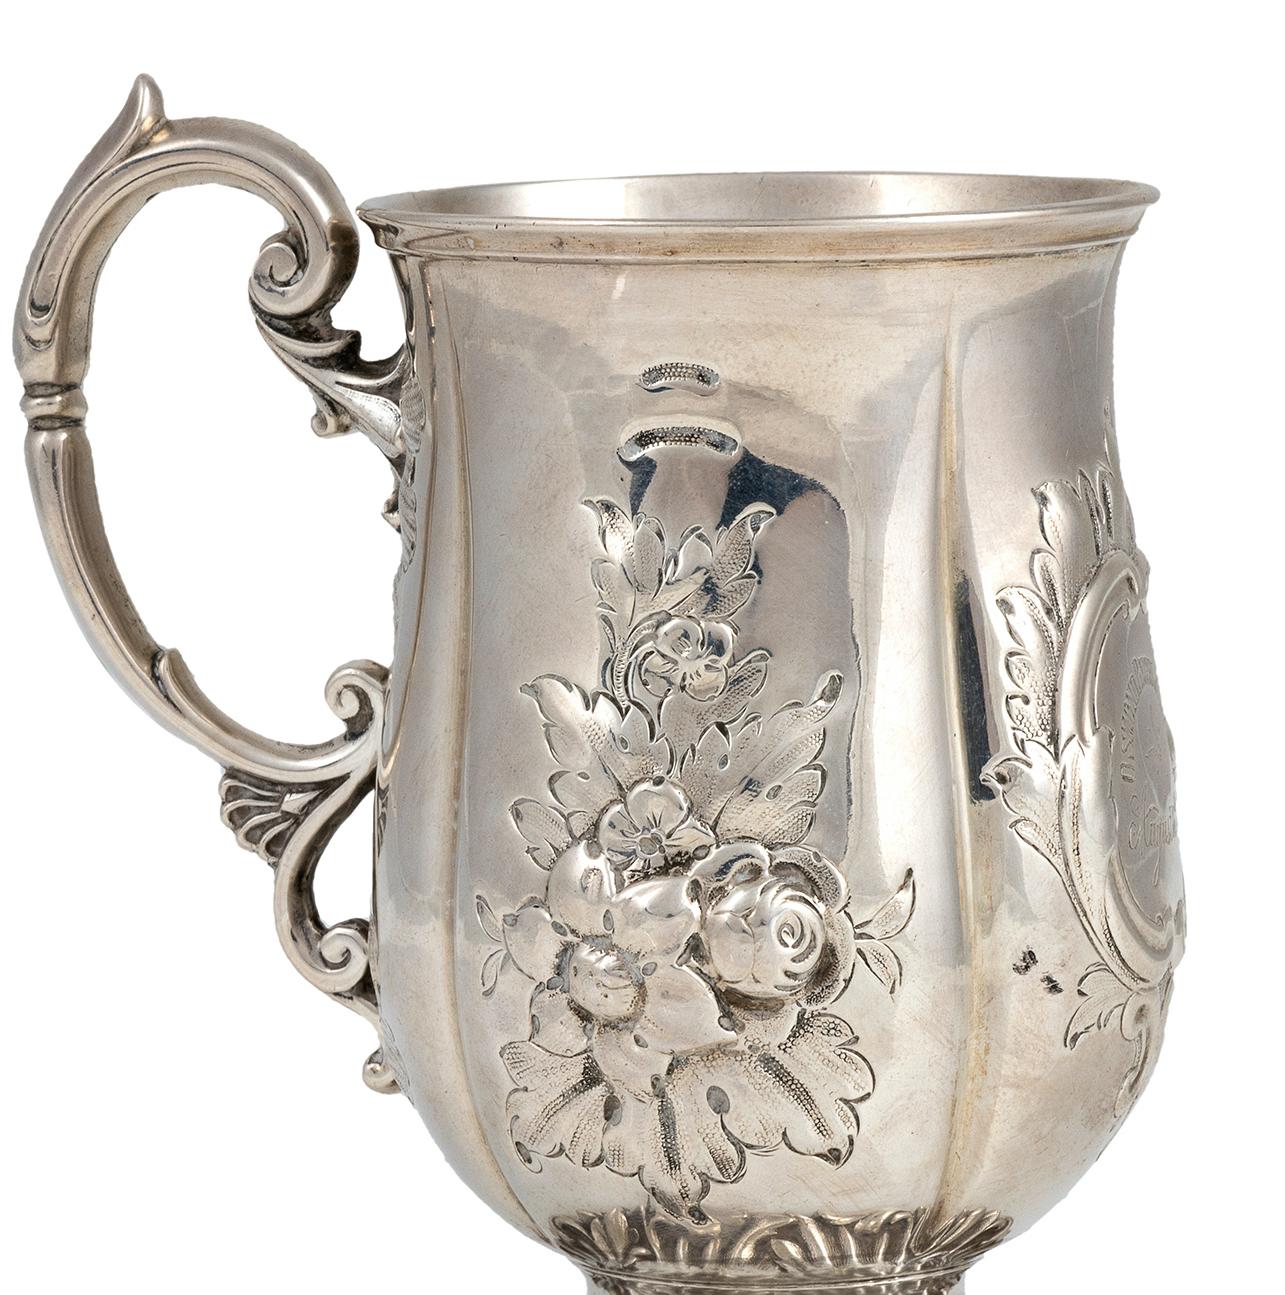 You are admiring a magnificent silver Victorian mug, realized in the Victorian London during the years 1857-1858.

Made of 925/1000 silver. Weight 0.158 Kgs.

This mug is embossed and chiseled with floral decorations.
Its realization is by John